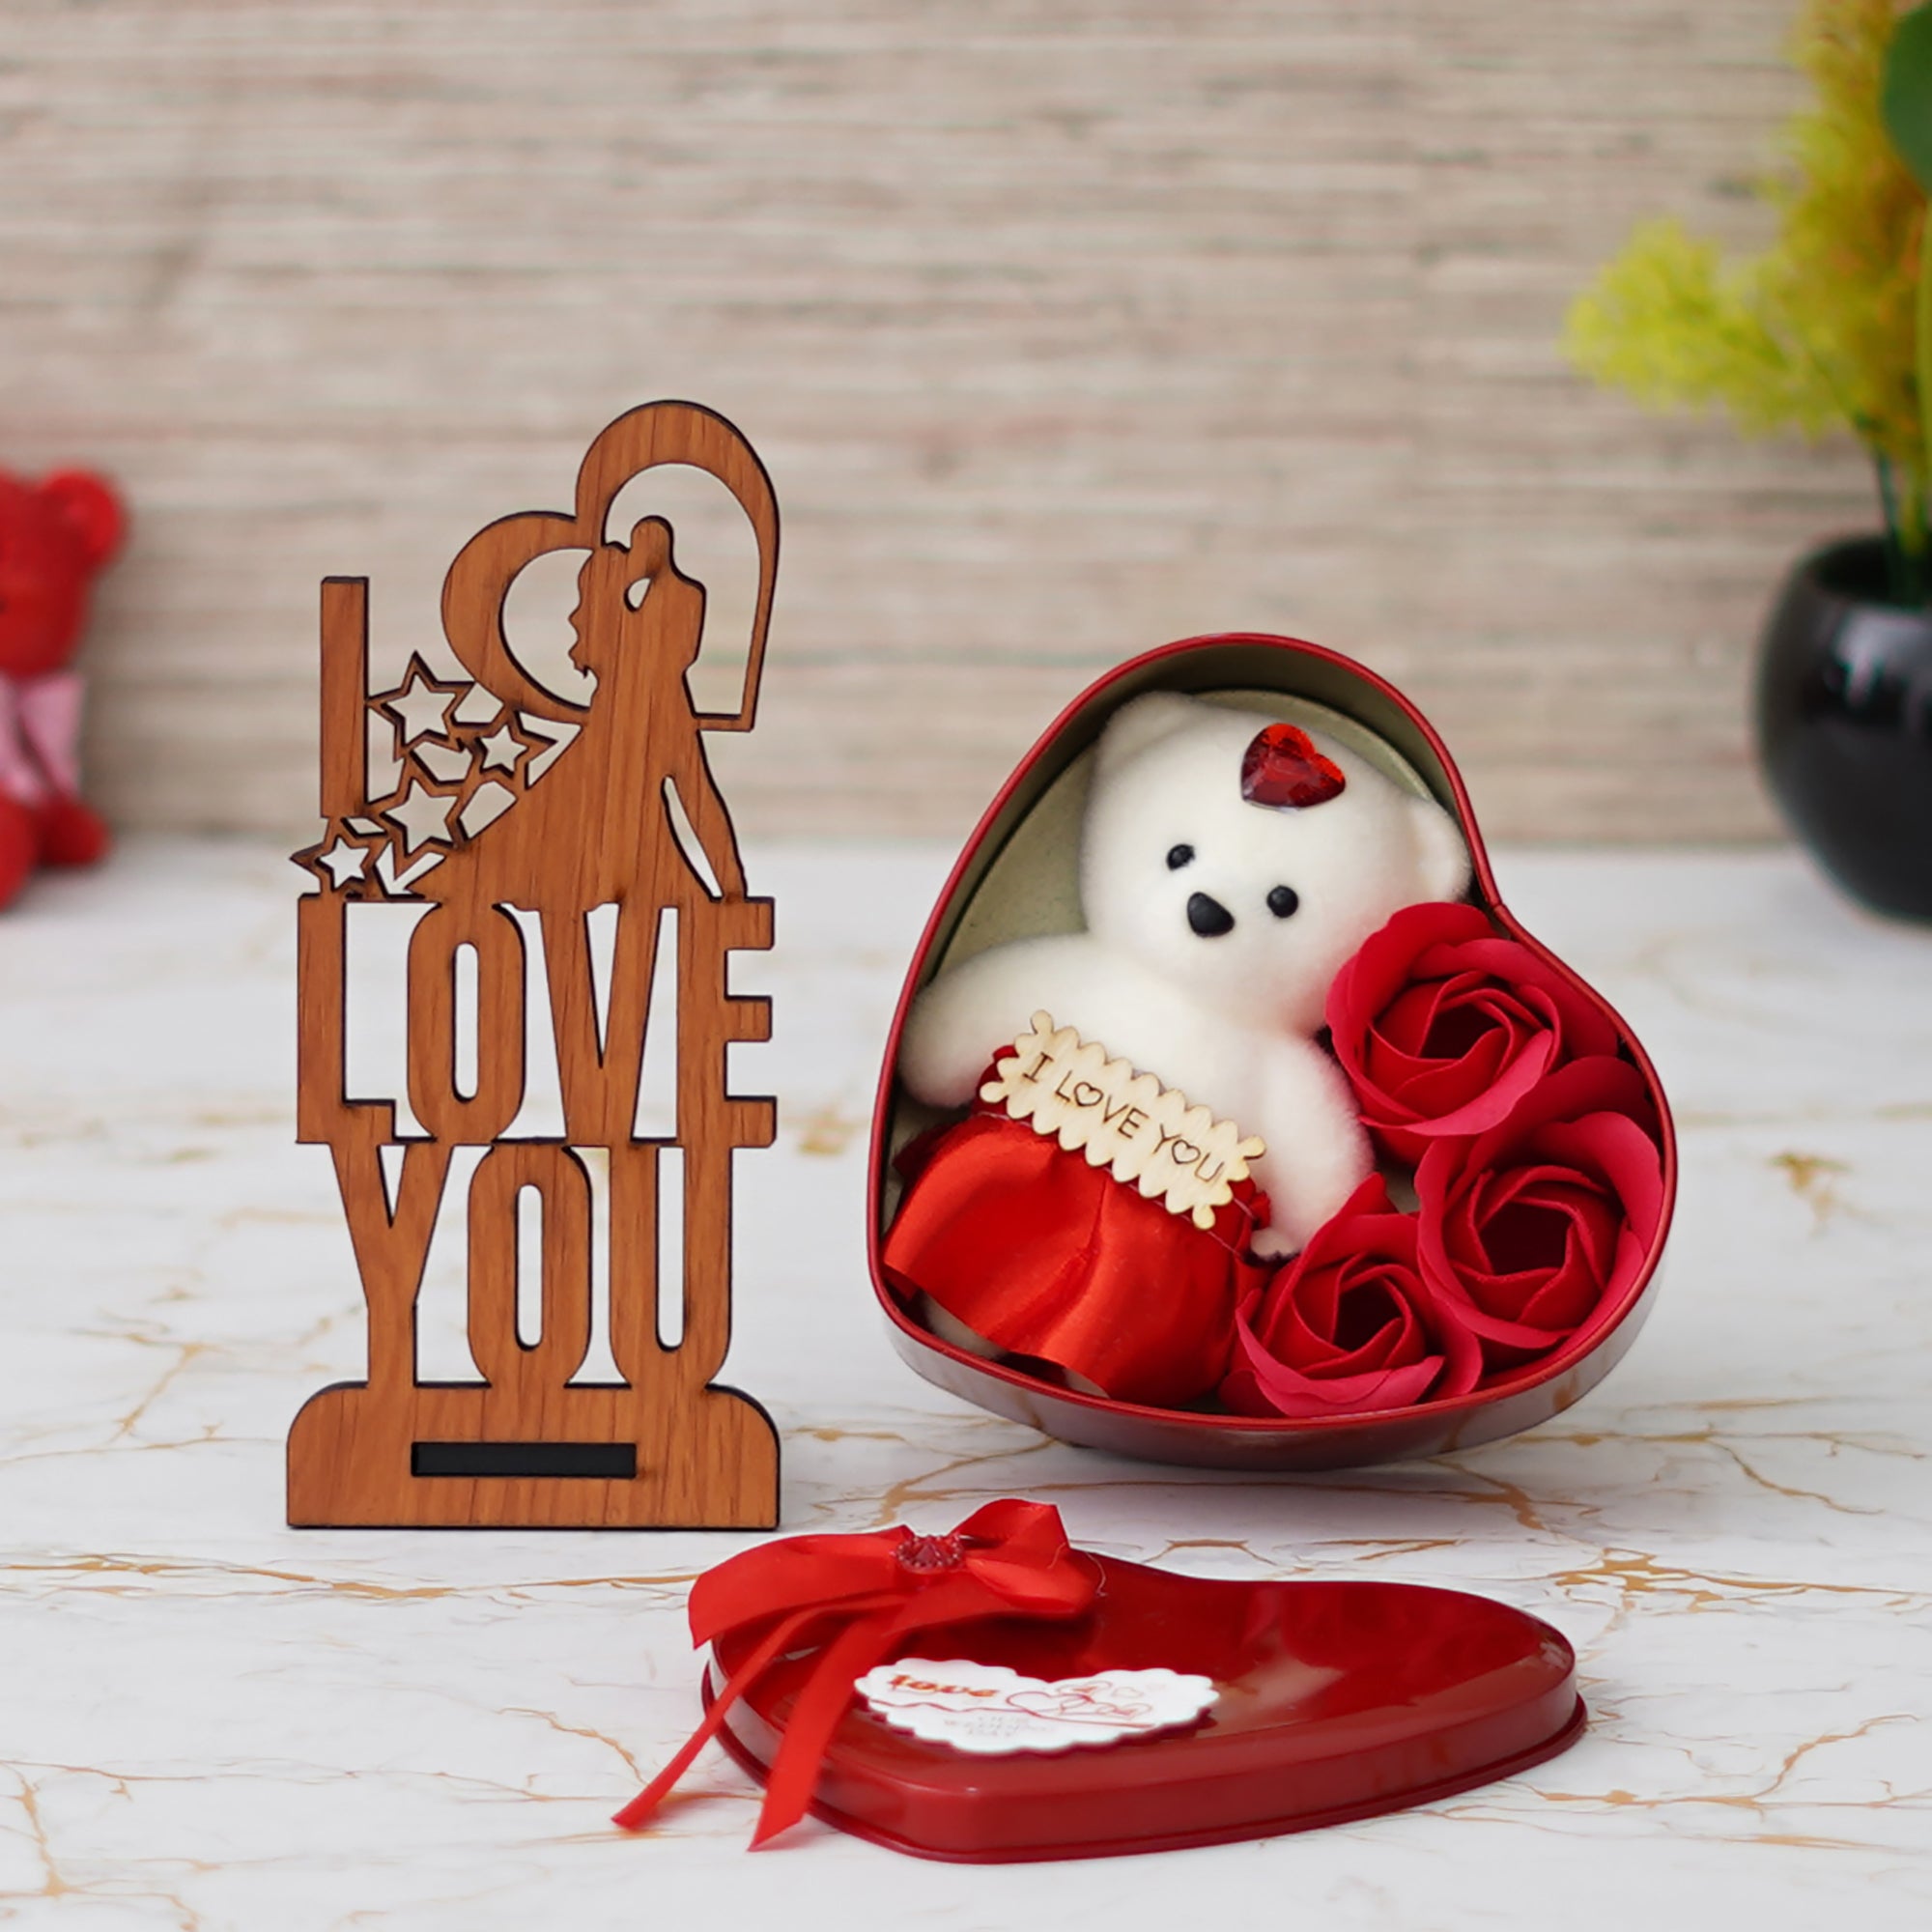 Valentine Combo of "Love You" Wooden Showpiece With Stand, Heart Shaped Gift Box Set with White Teddy and Red Roses